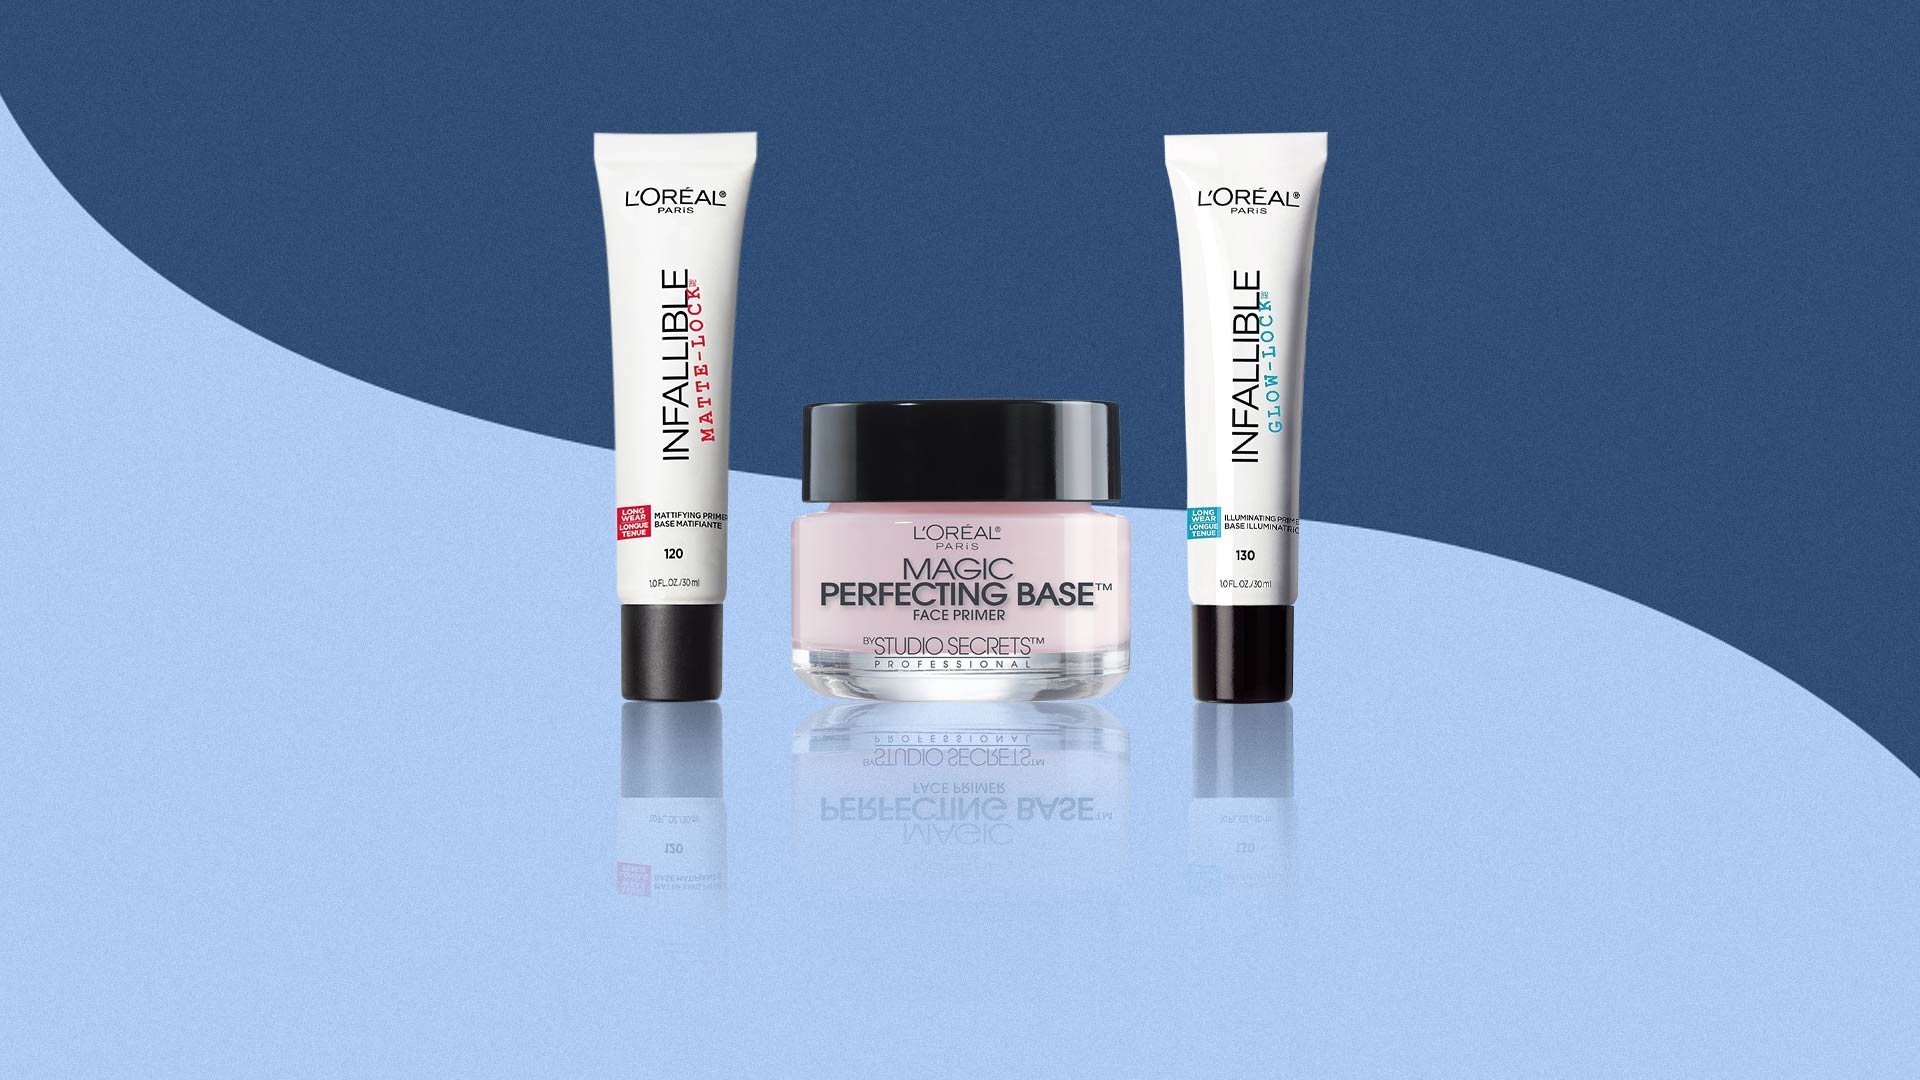 Loreal Paris Article These Silicone Based Primers Help Makeup Last All Day D